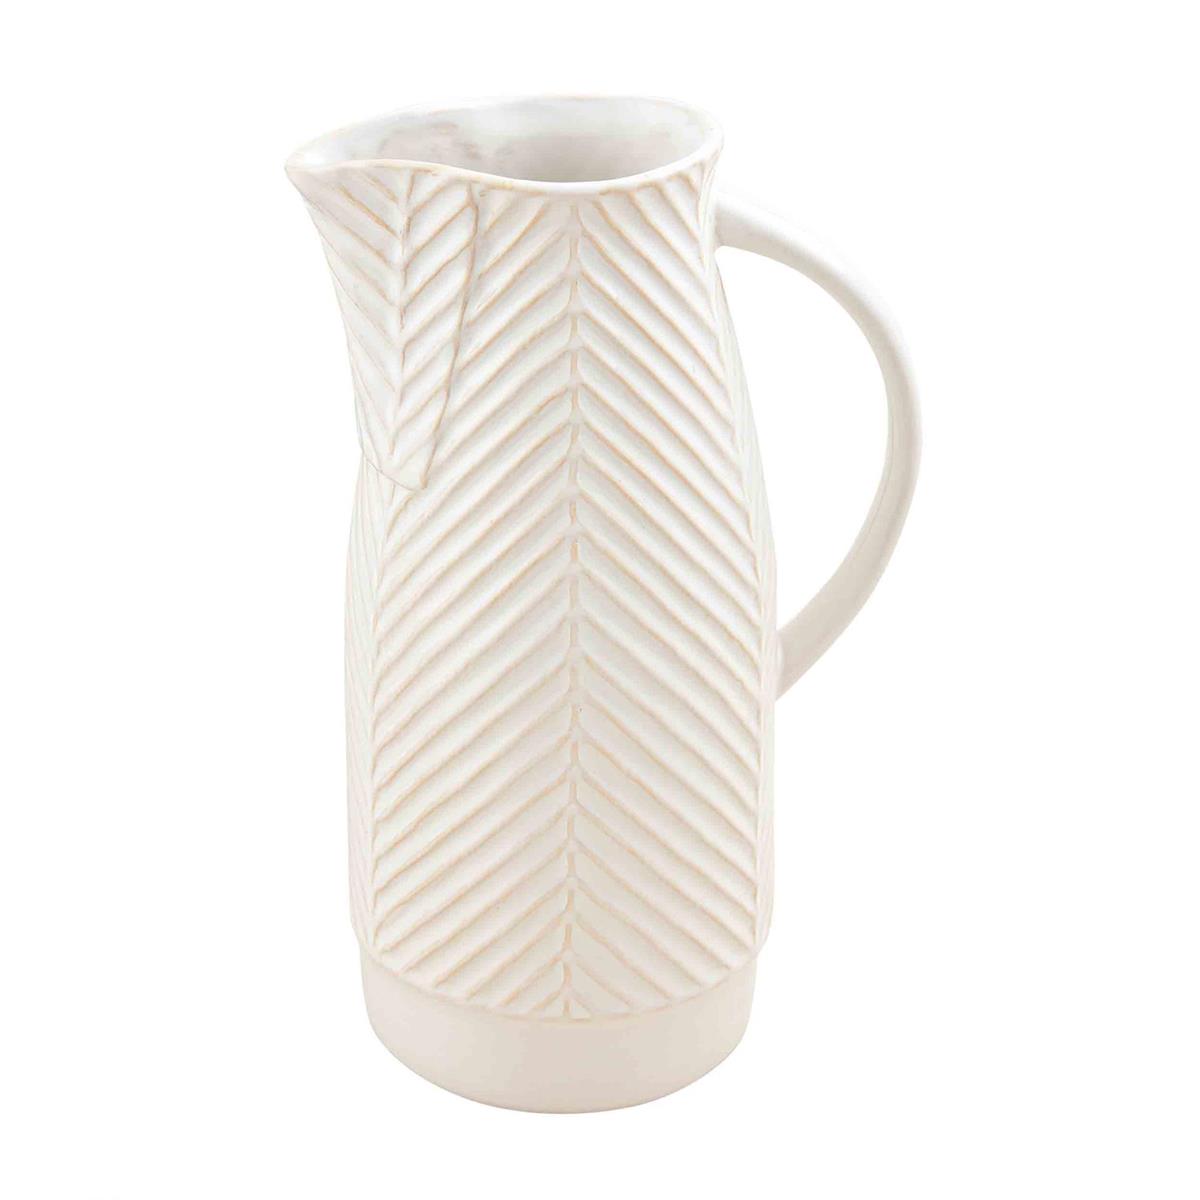 textured pitcher on a white background.